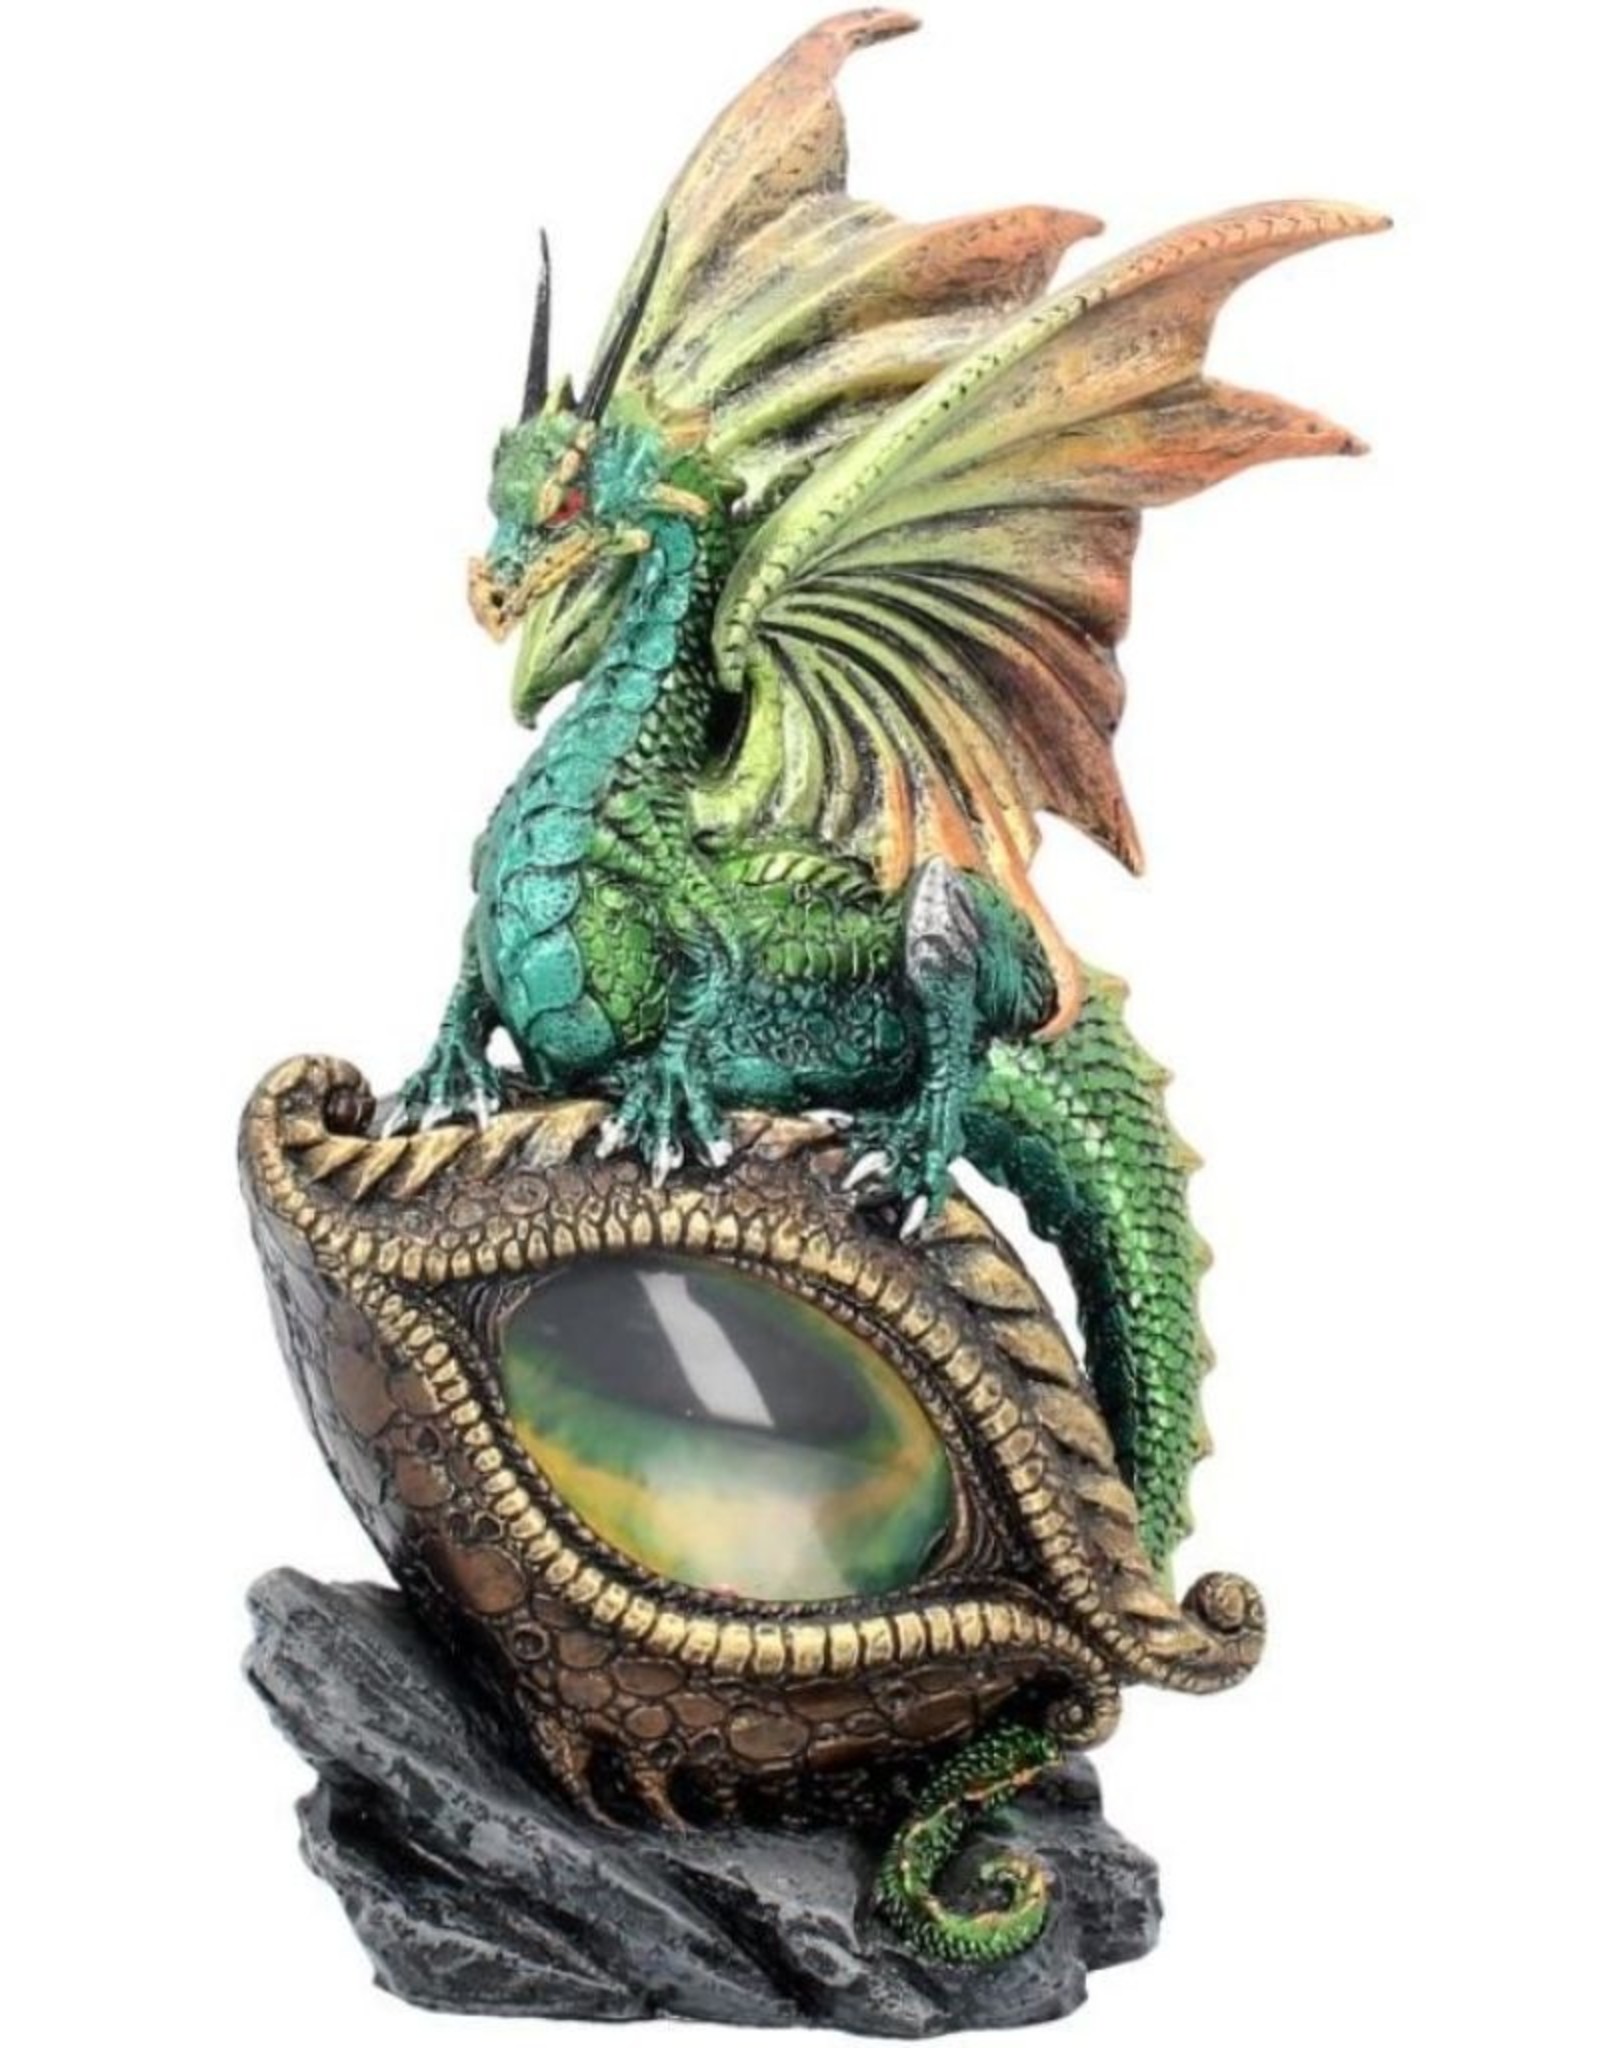 Alator Giftware & Lifestyle - Eye of the Dragon Light Up Red Figurine Ornament Green